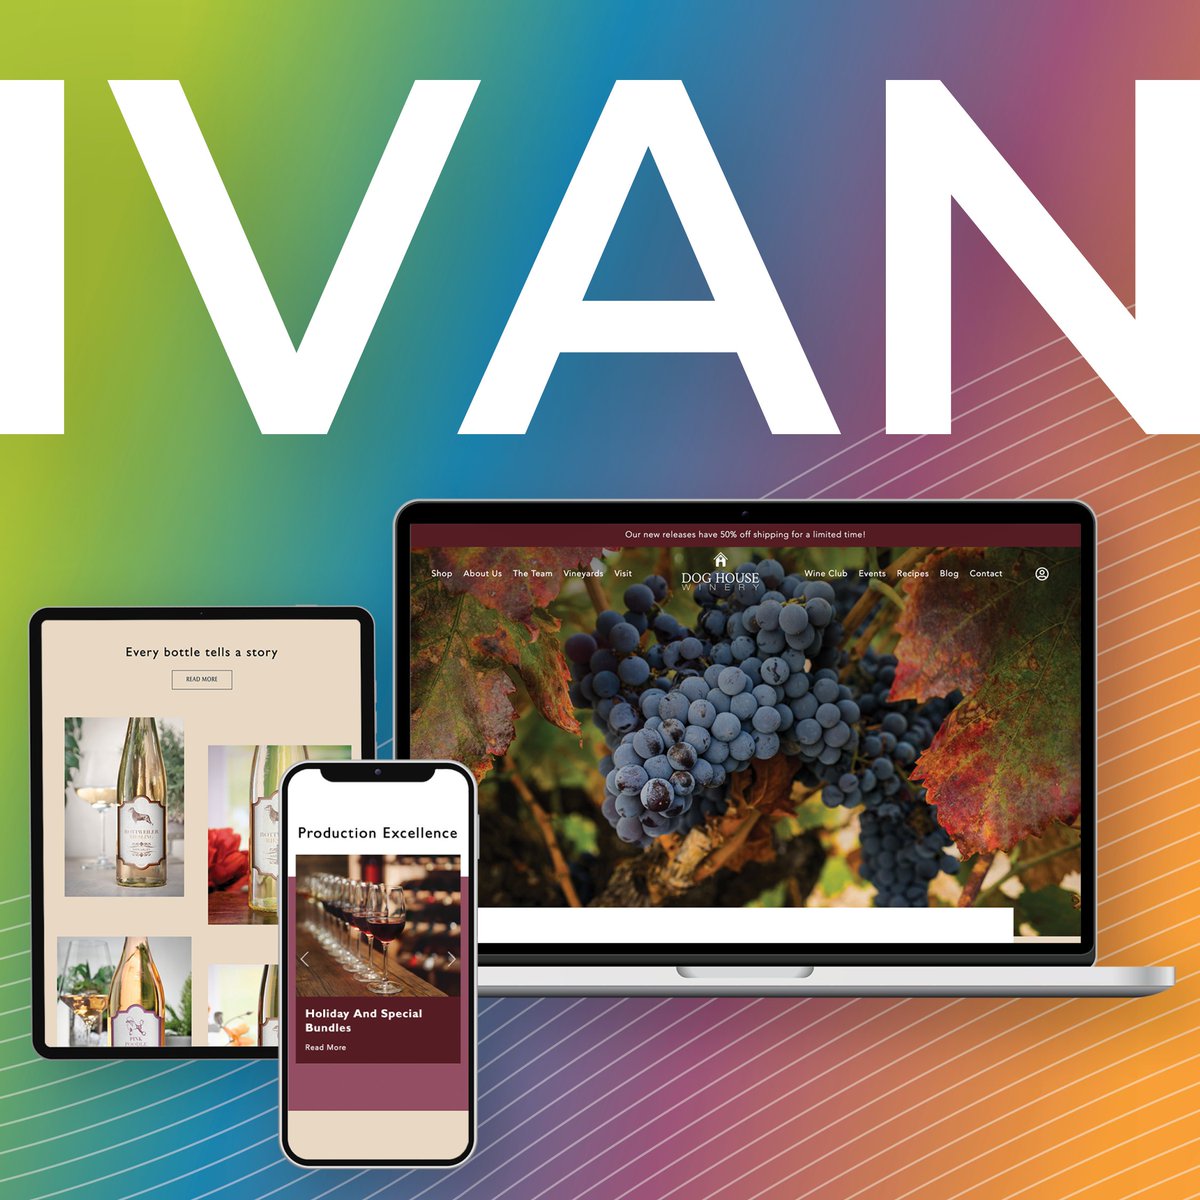 Introducing Ivan, a WordPress template that stands out for its simplicity and flexibility. Ivan is a new fully customizable canvas for wineries that empowers you to unleash your creativity and express your unique voice. Only $349! Introducing Ivan: bit.ly/49ZELFo